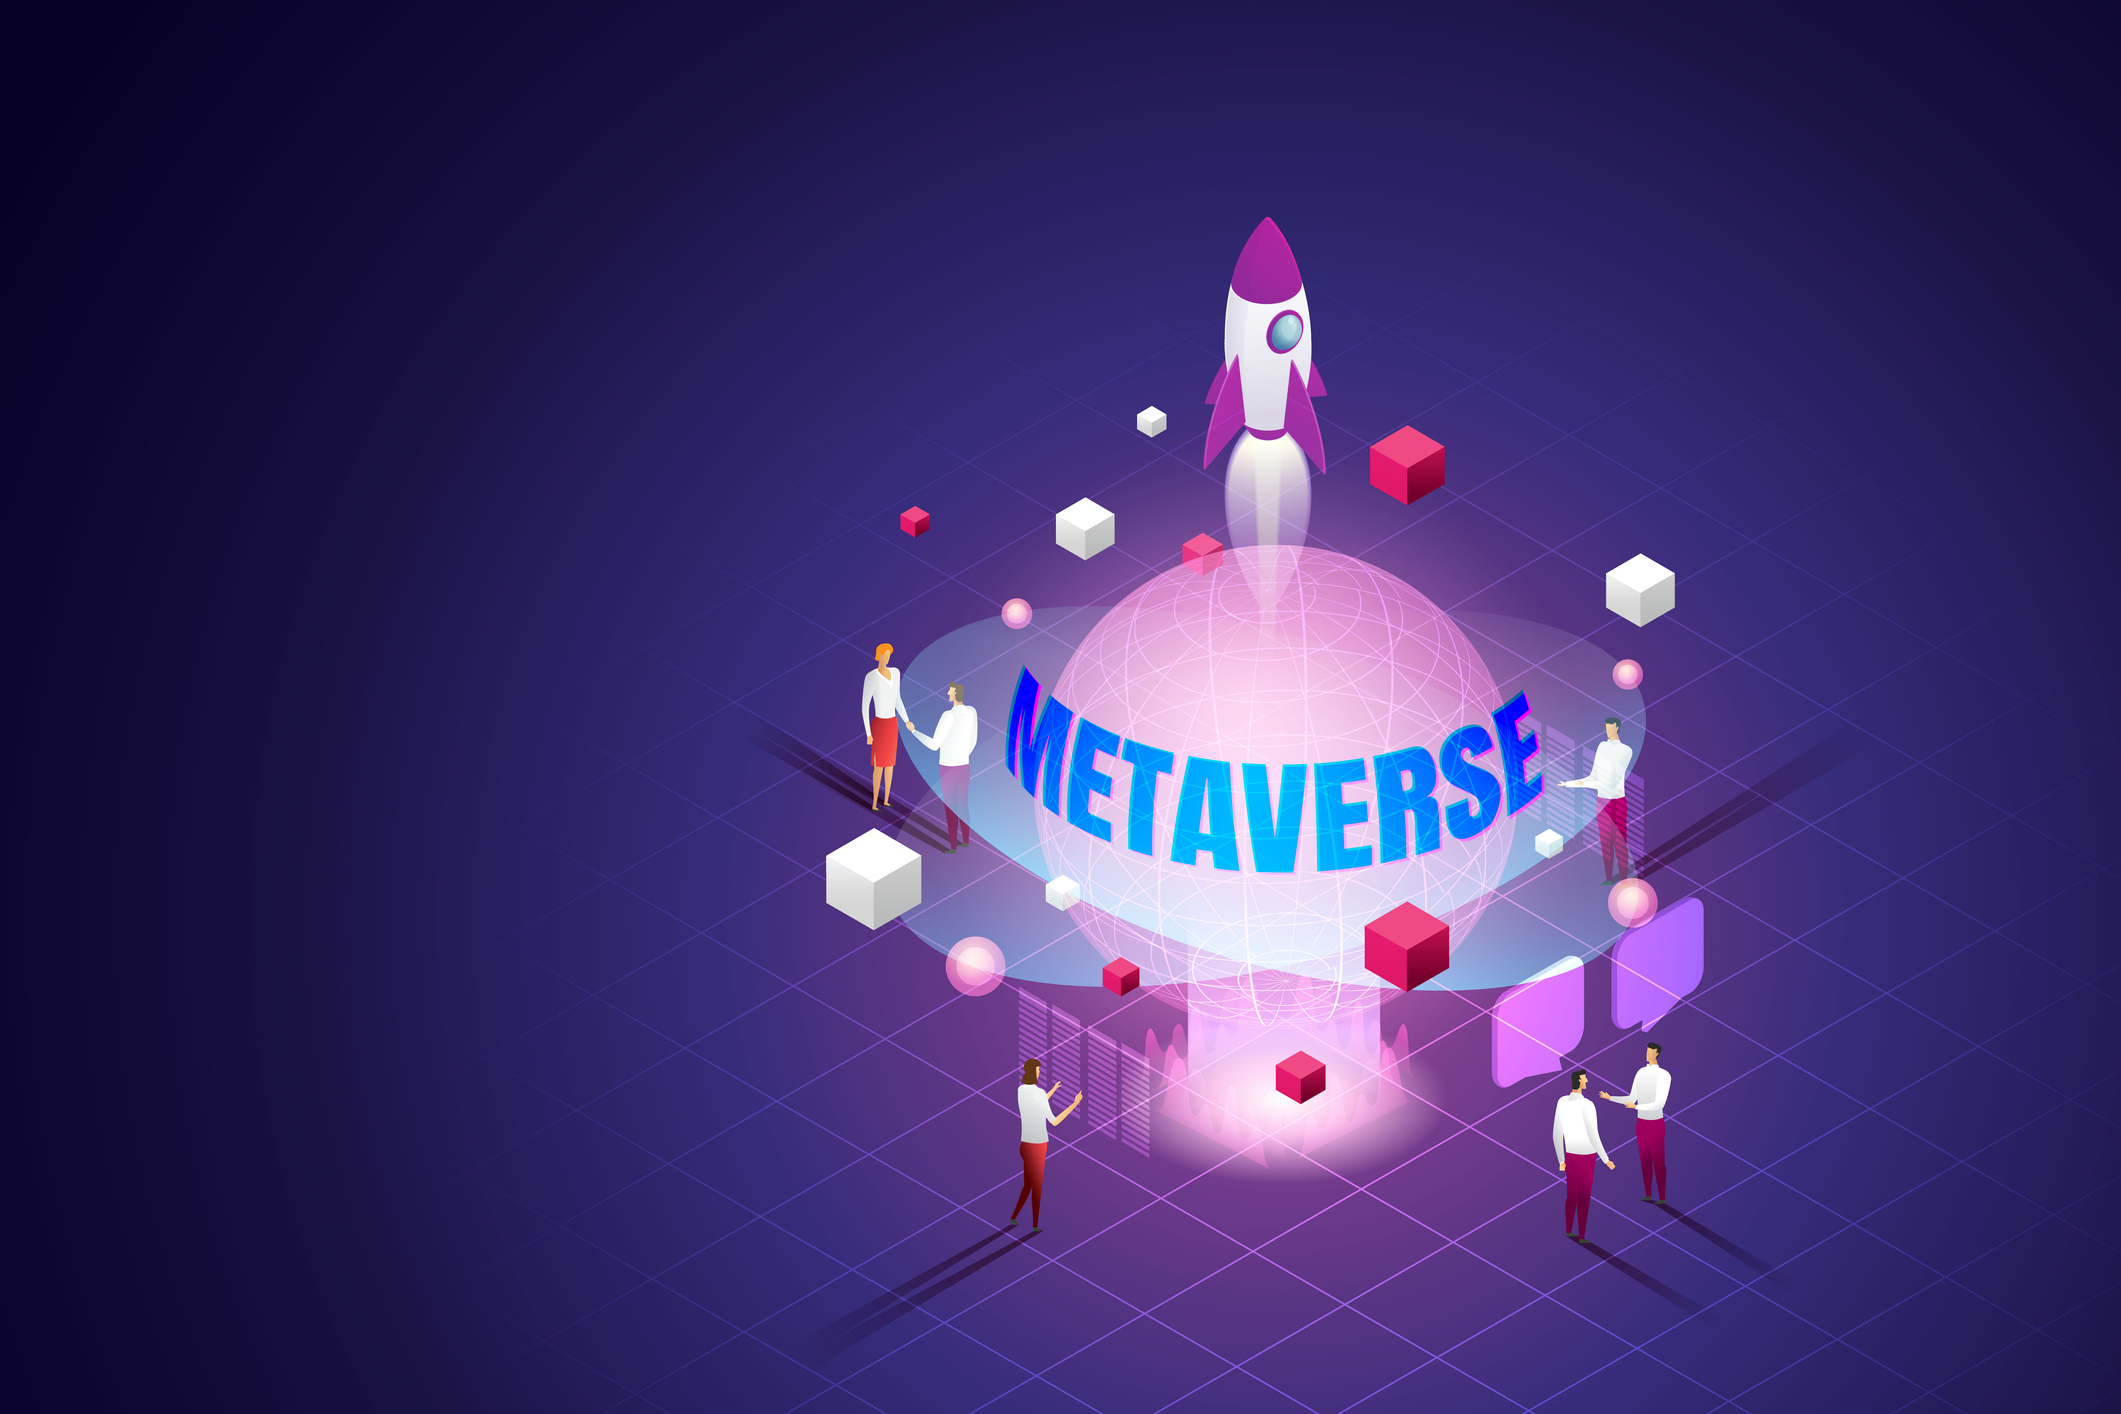 What Is the Metaverse? | The Motley Fool